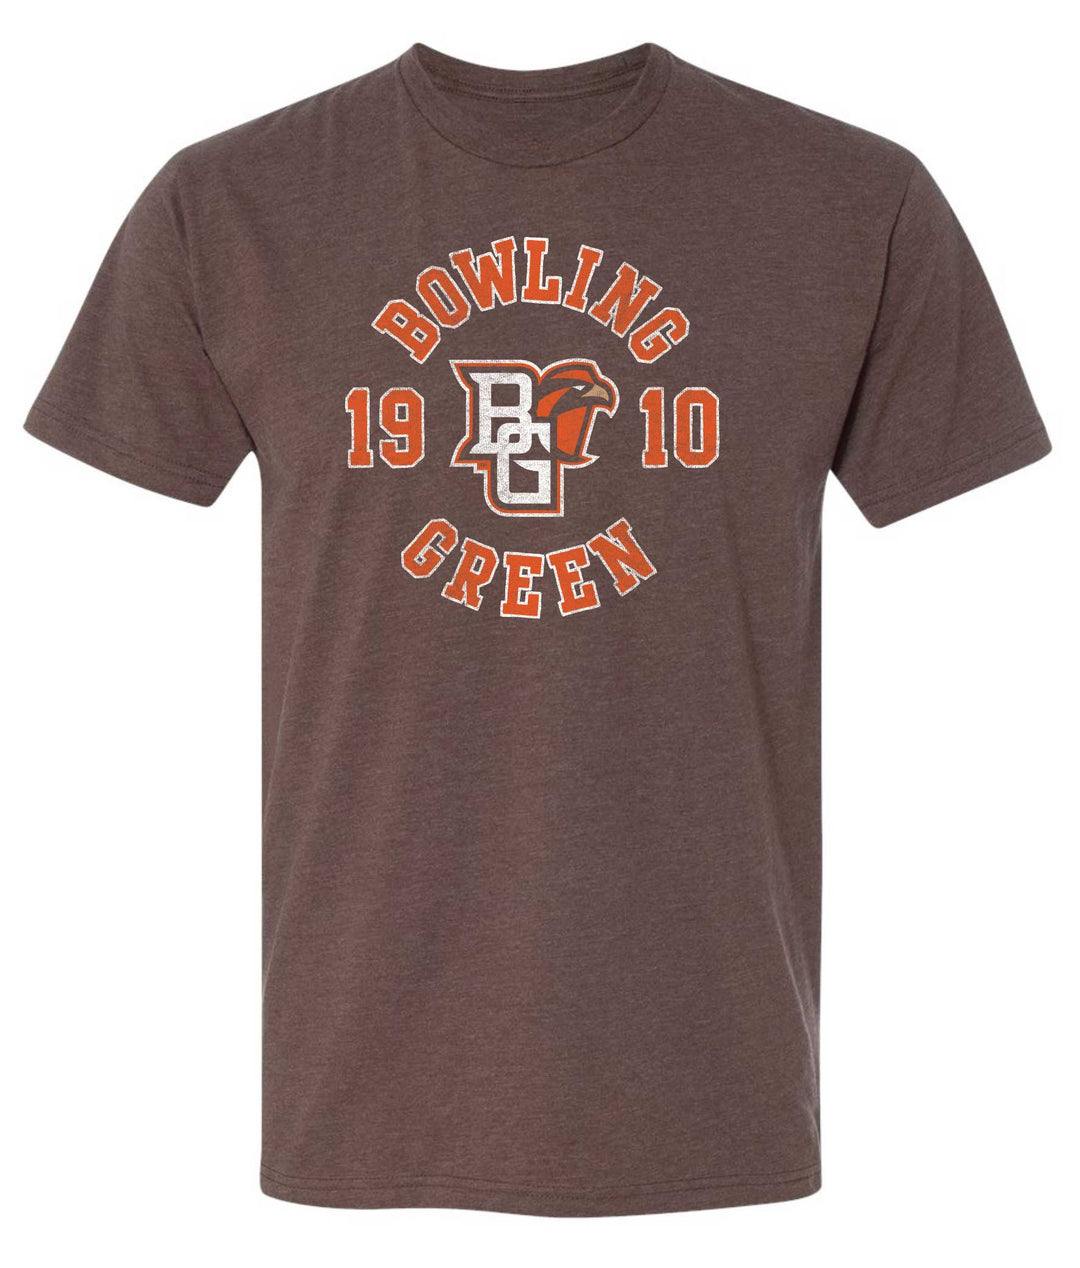 Bowling Green State University 1910 T-Shirt from Nudge Printing